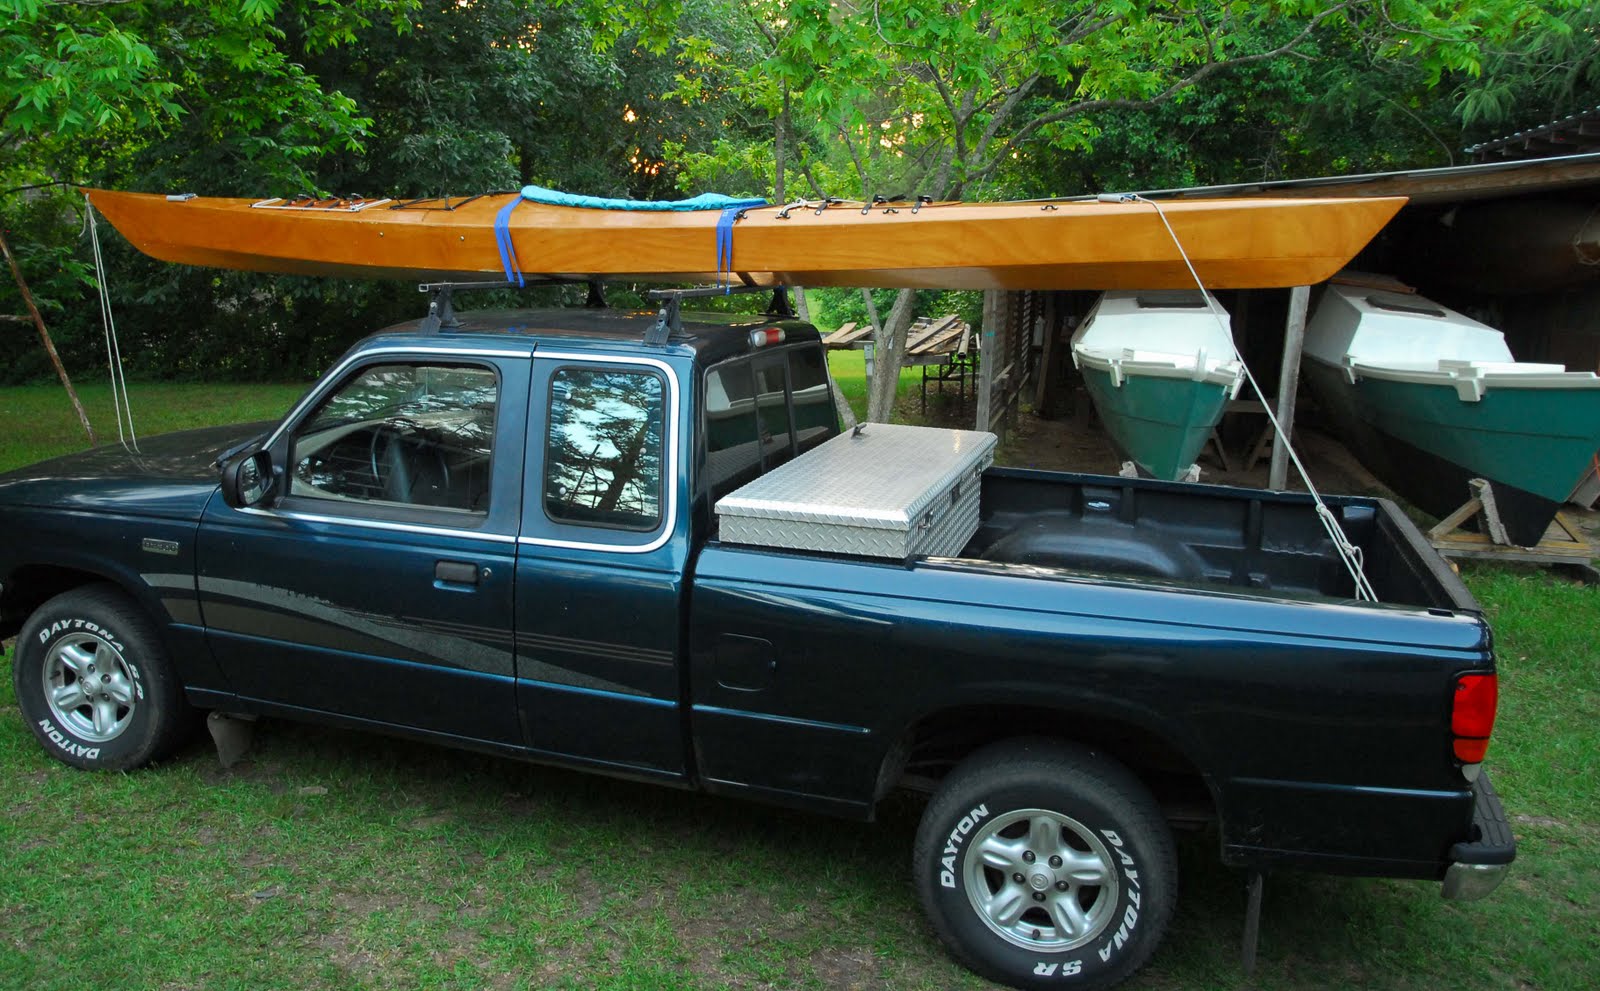 BugOut Survival Roof Racks for Your Bug Out Vehicle